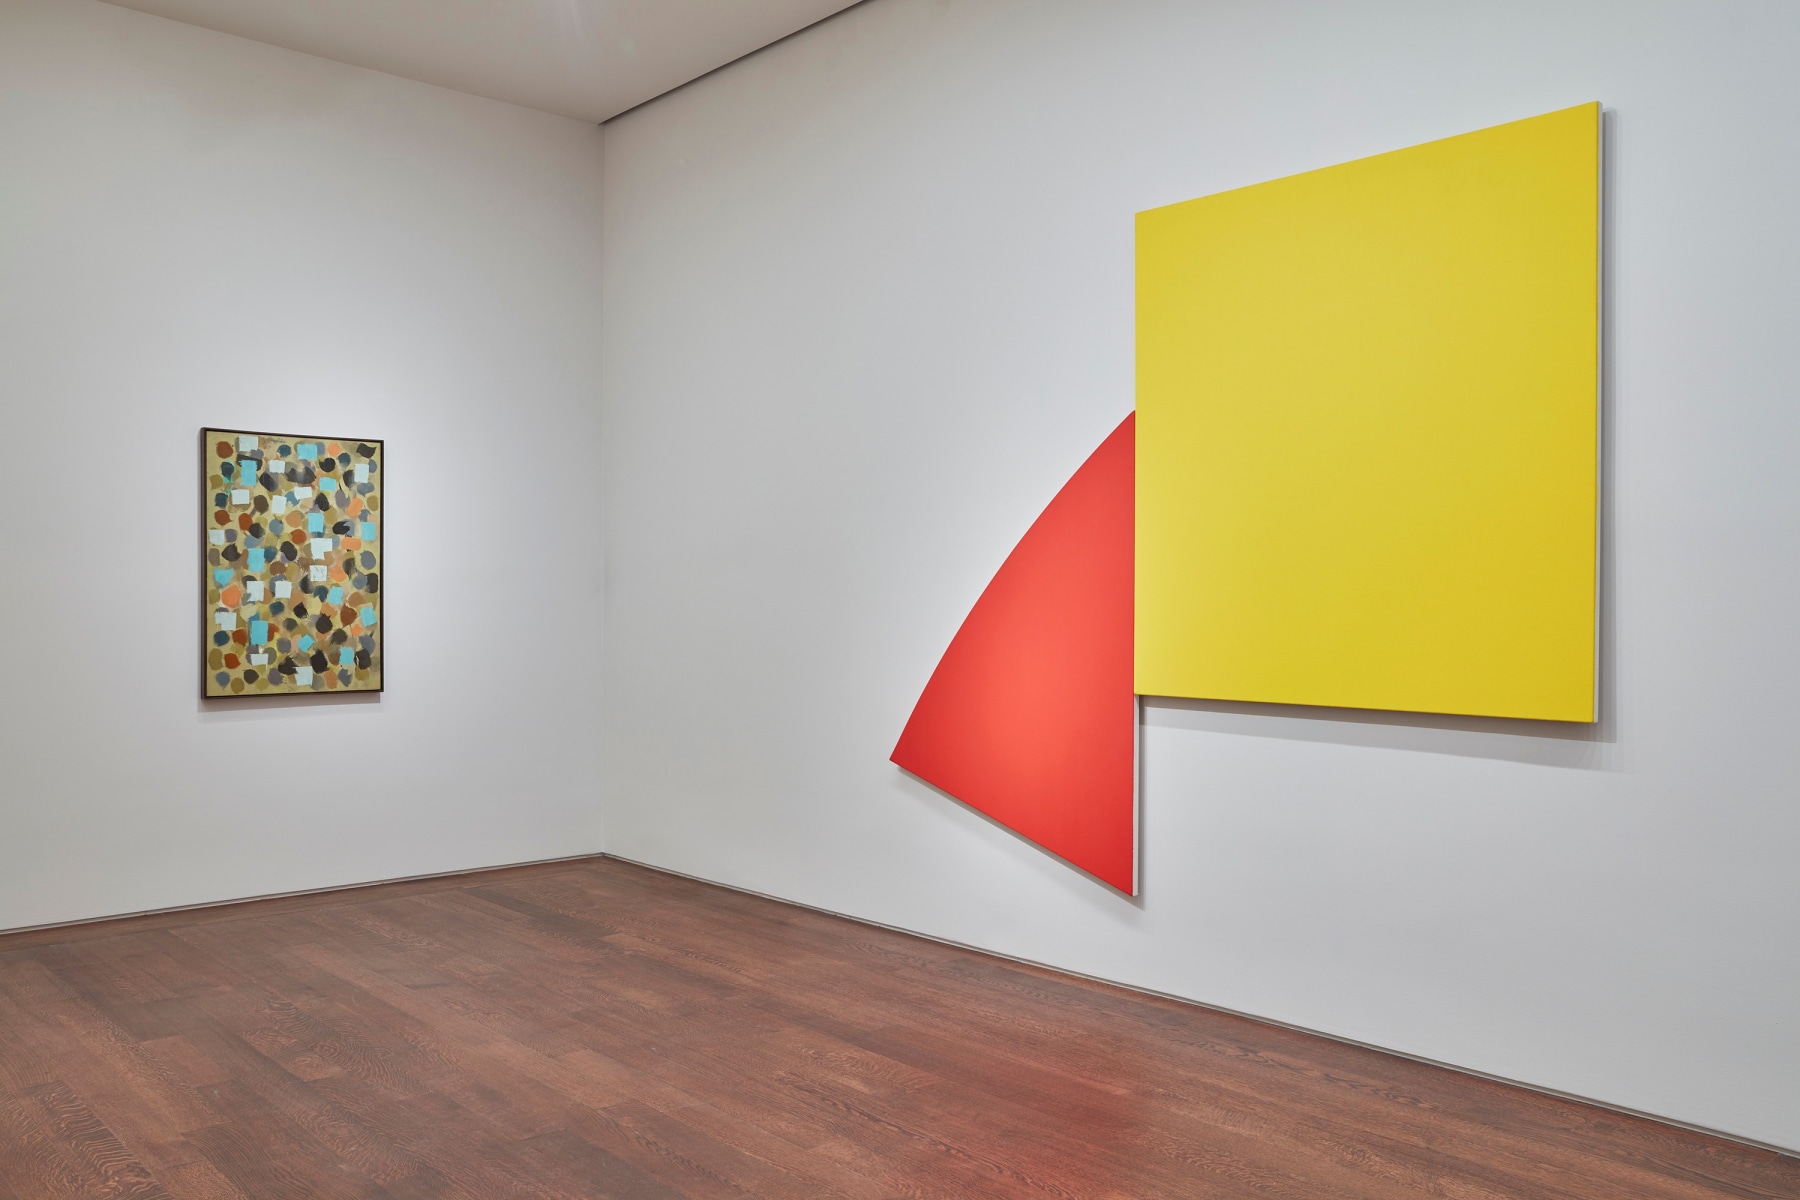 Ellsworth Kelly - Untitled (Red and Yellow), 1989 - Viewing Room - Acquavella Galleries Viewing Room